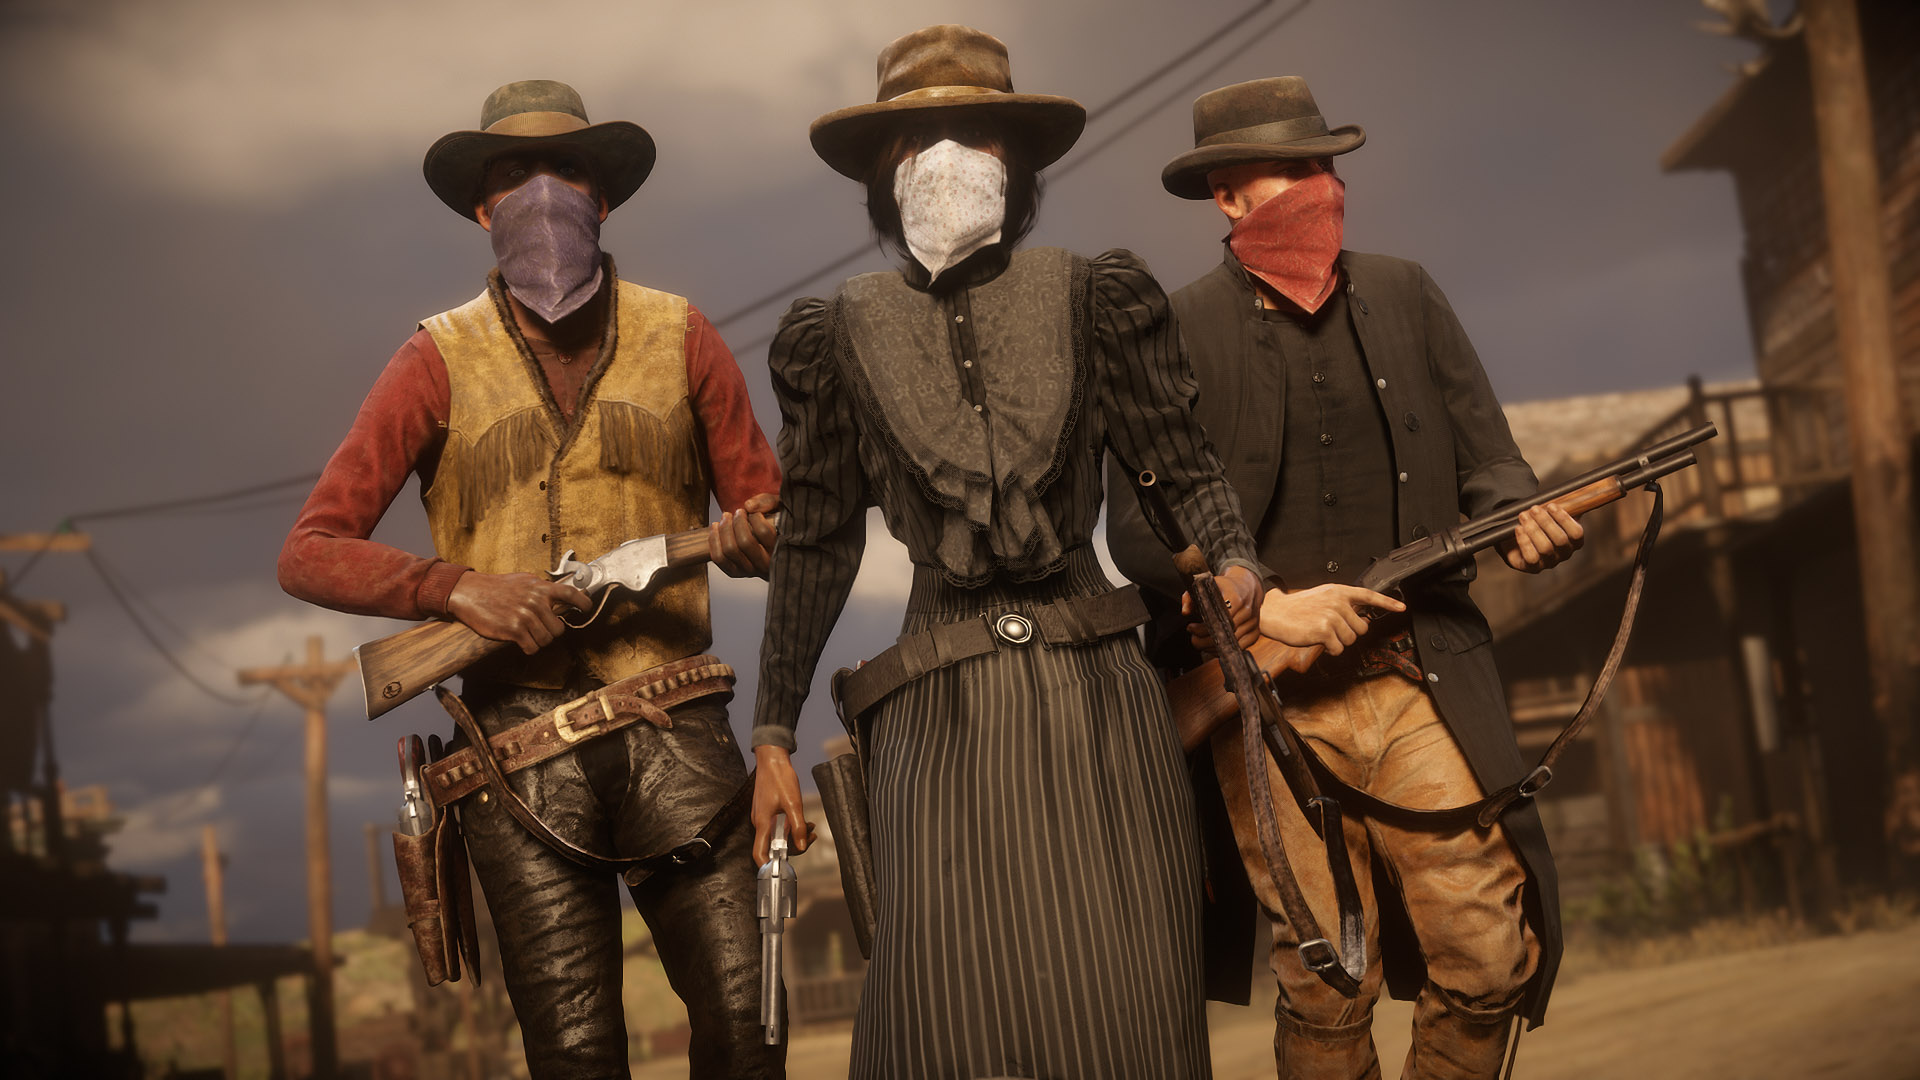 RED DEAD ONLINE SOLO LOBBY METHOD - INVITE ONLY - FRIEND NEEDED 